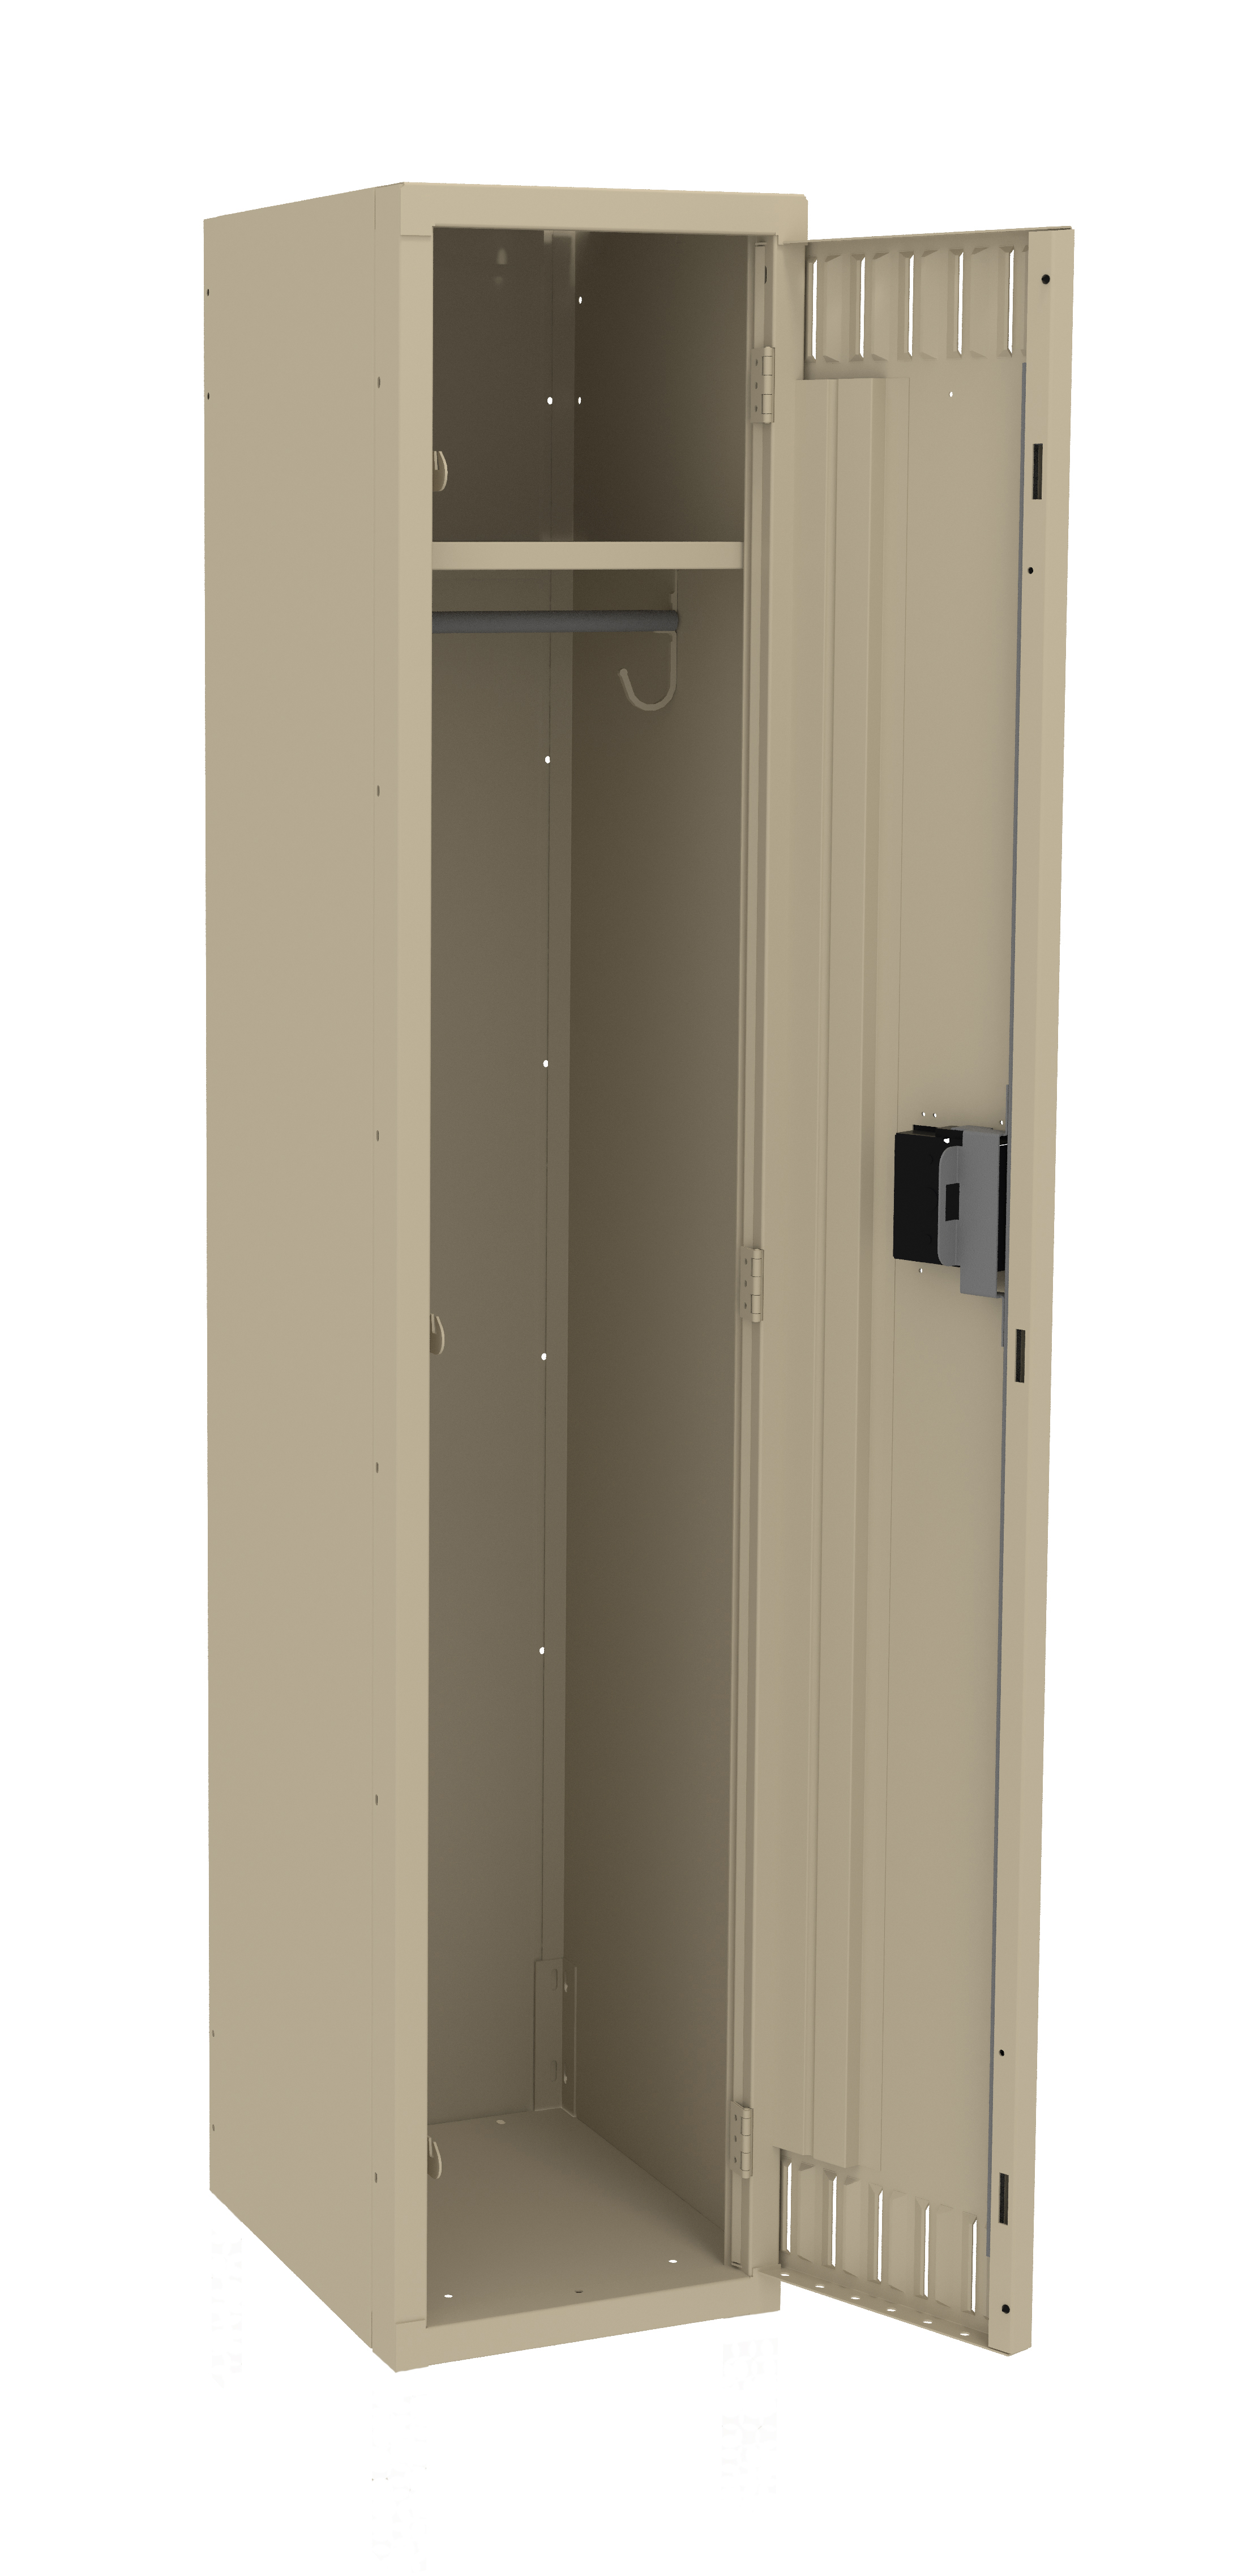 Tennsco - Storage Made Easy - Single Tier Locker - One Wide Without Legs  (Unassembled)